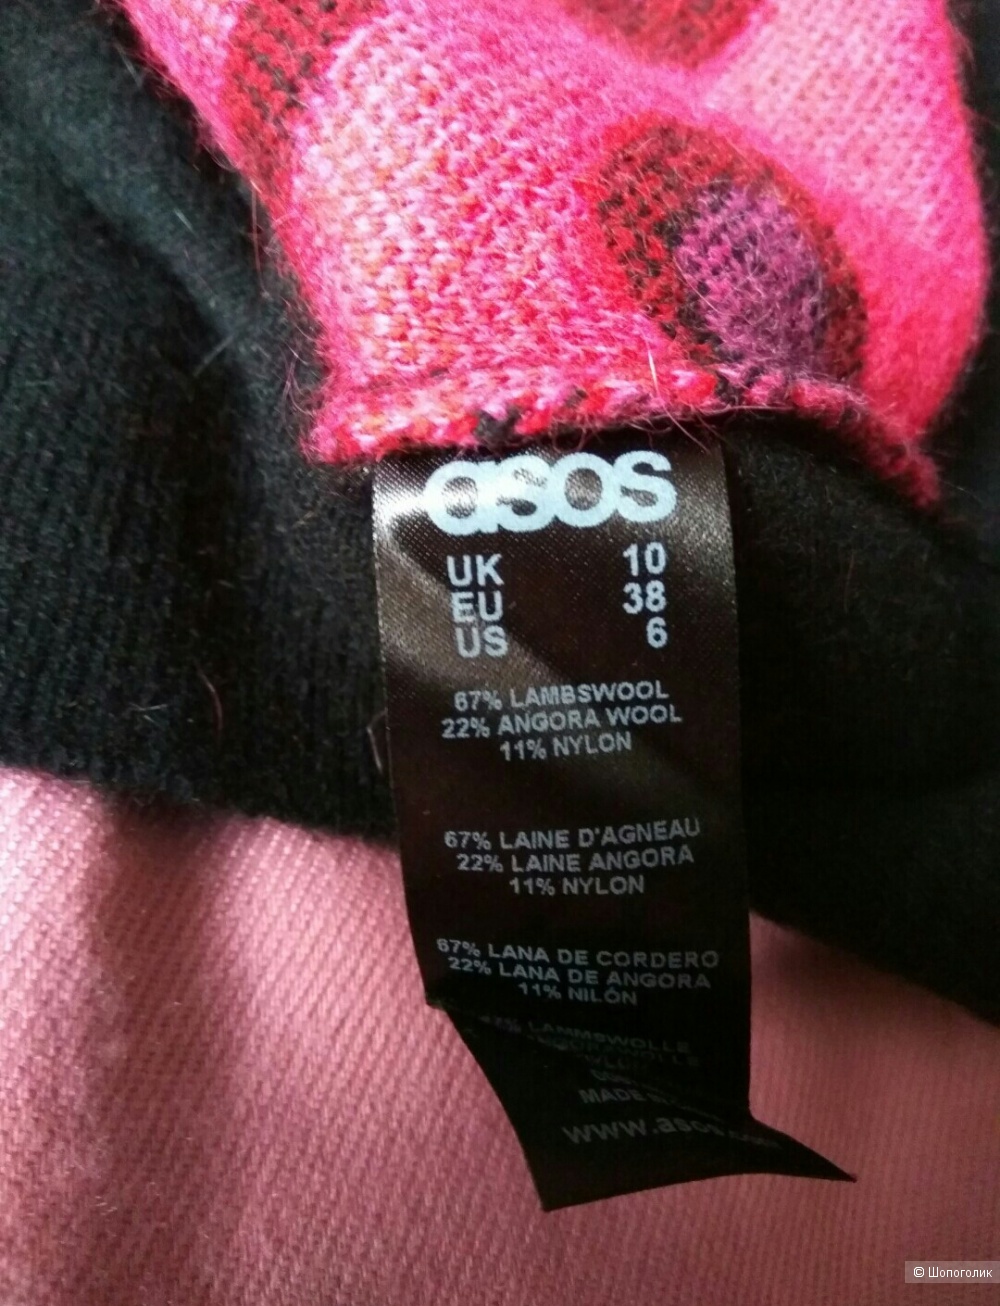 ASOS Jumper With Falling Hearts, 10 UK